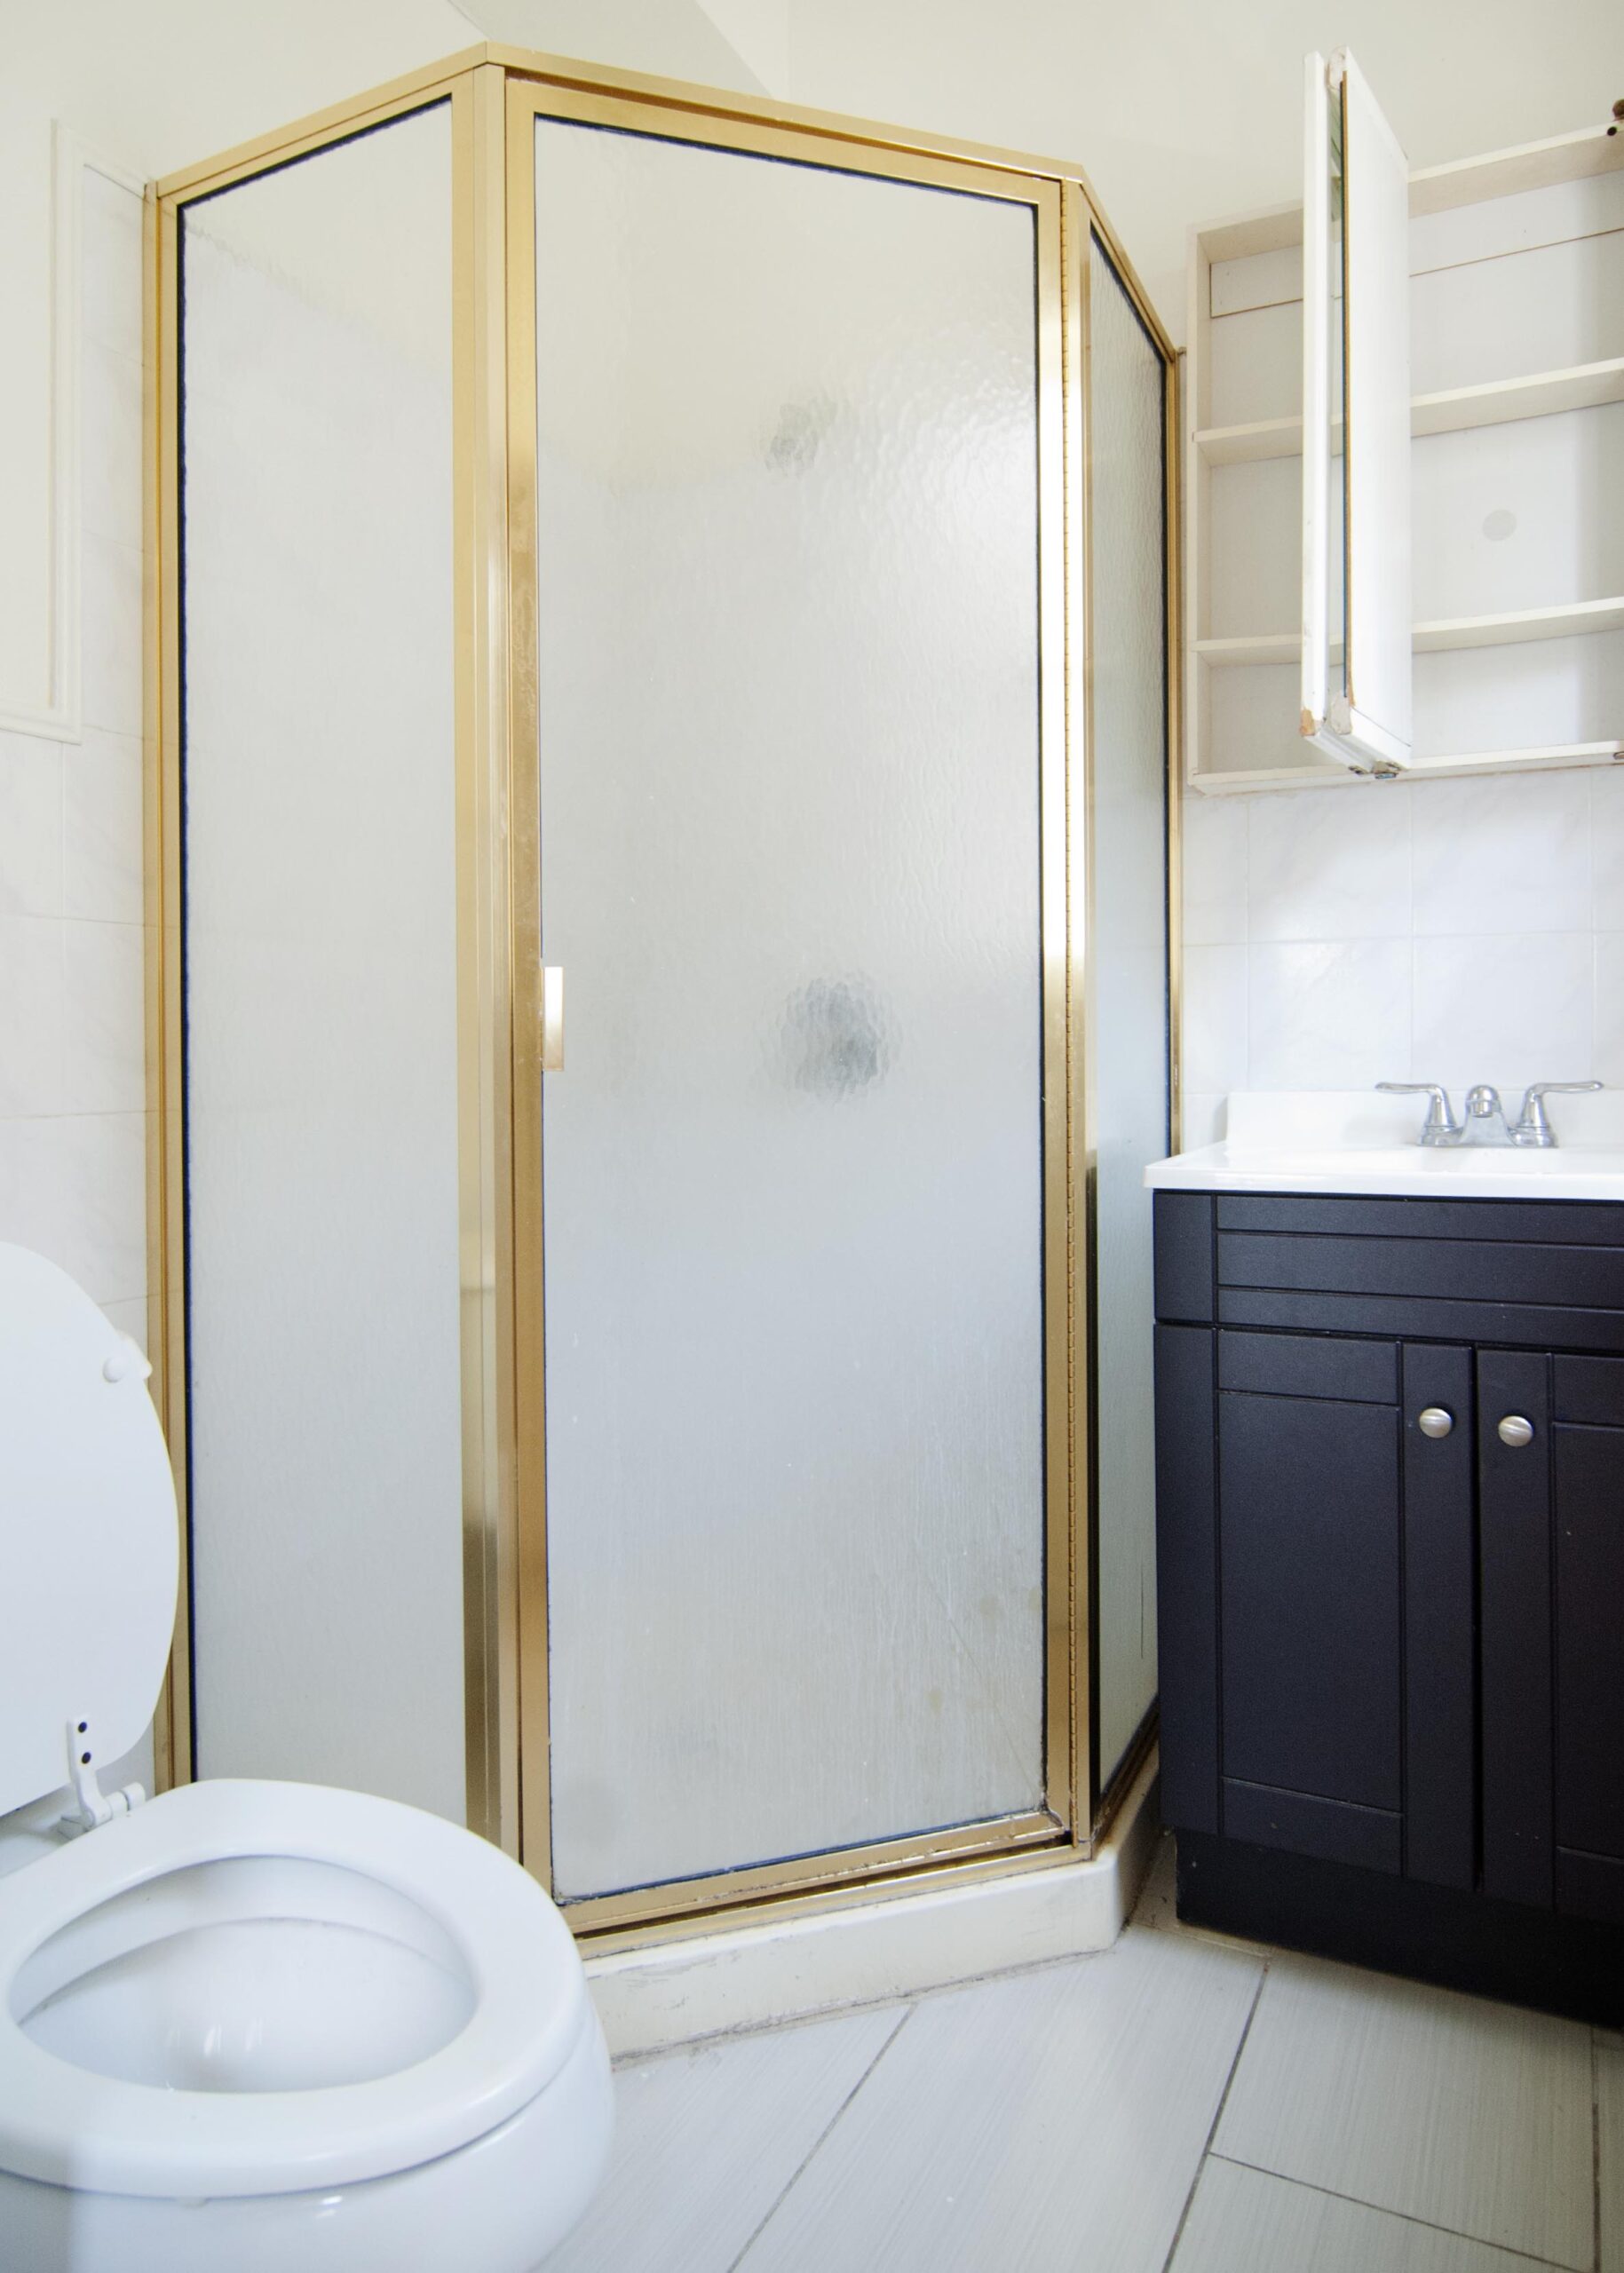 Our first floor bathroom as purchased // via Yellow Brick Home